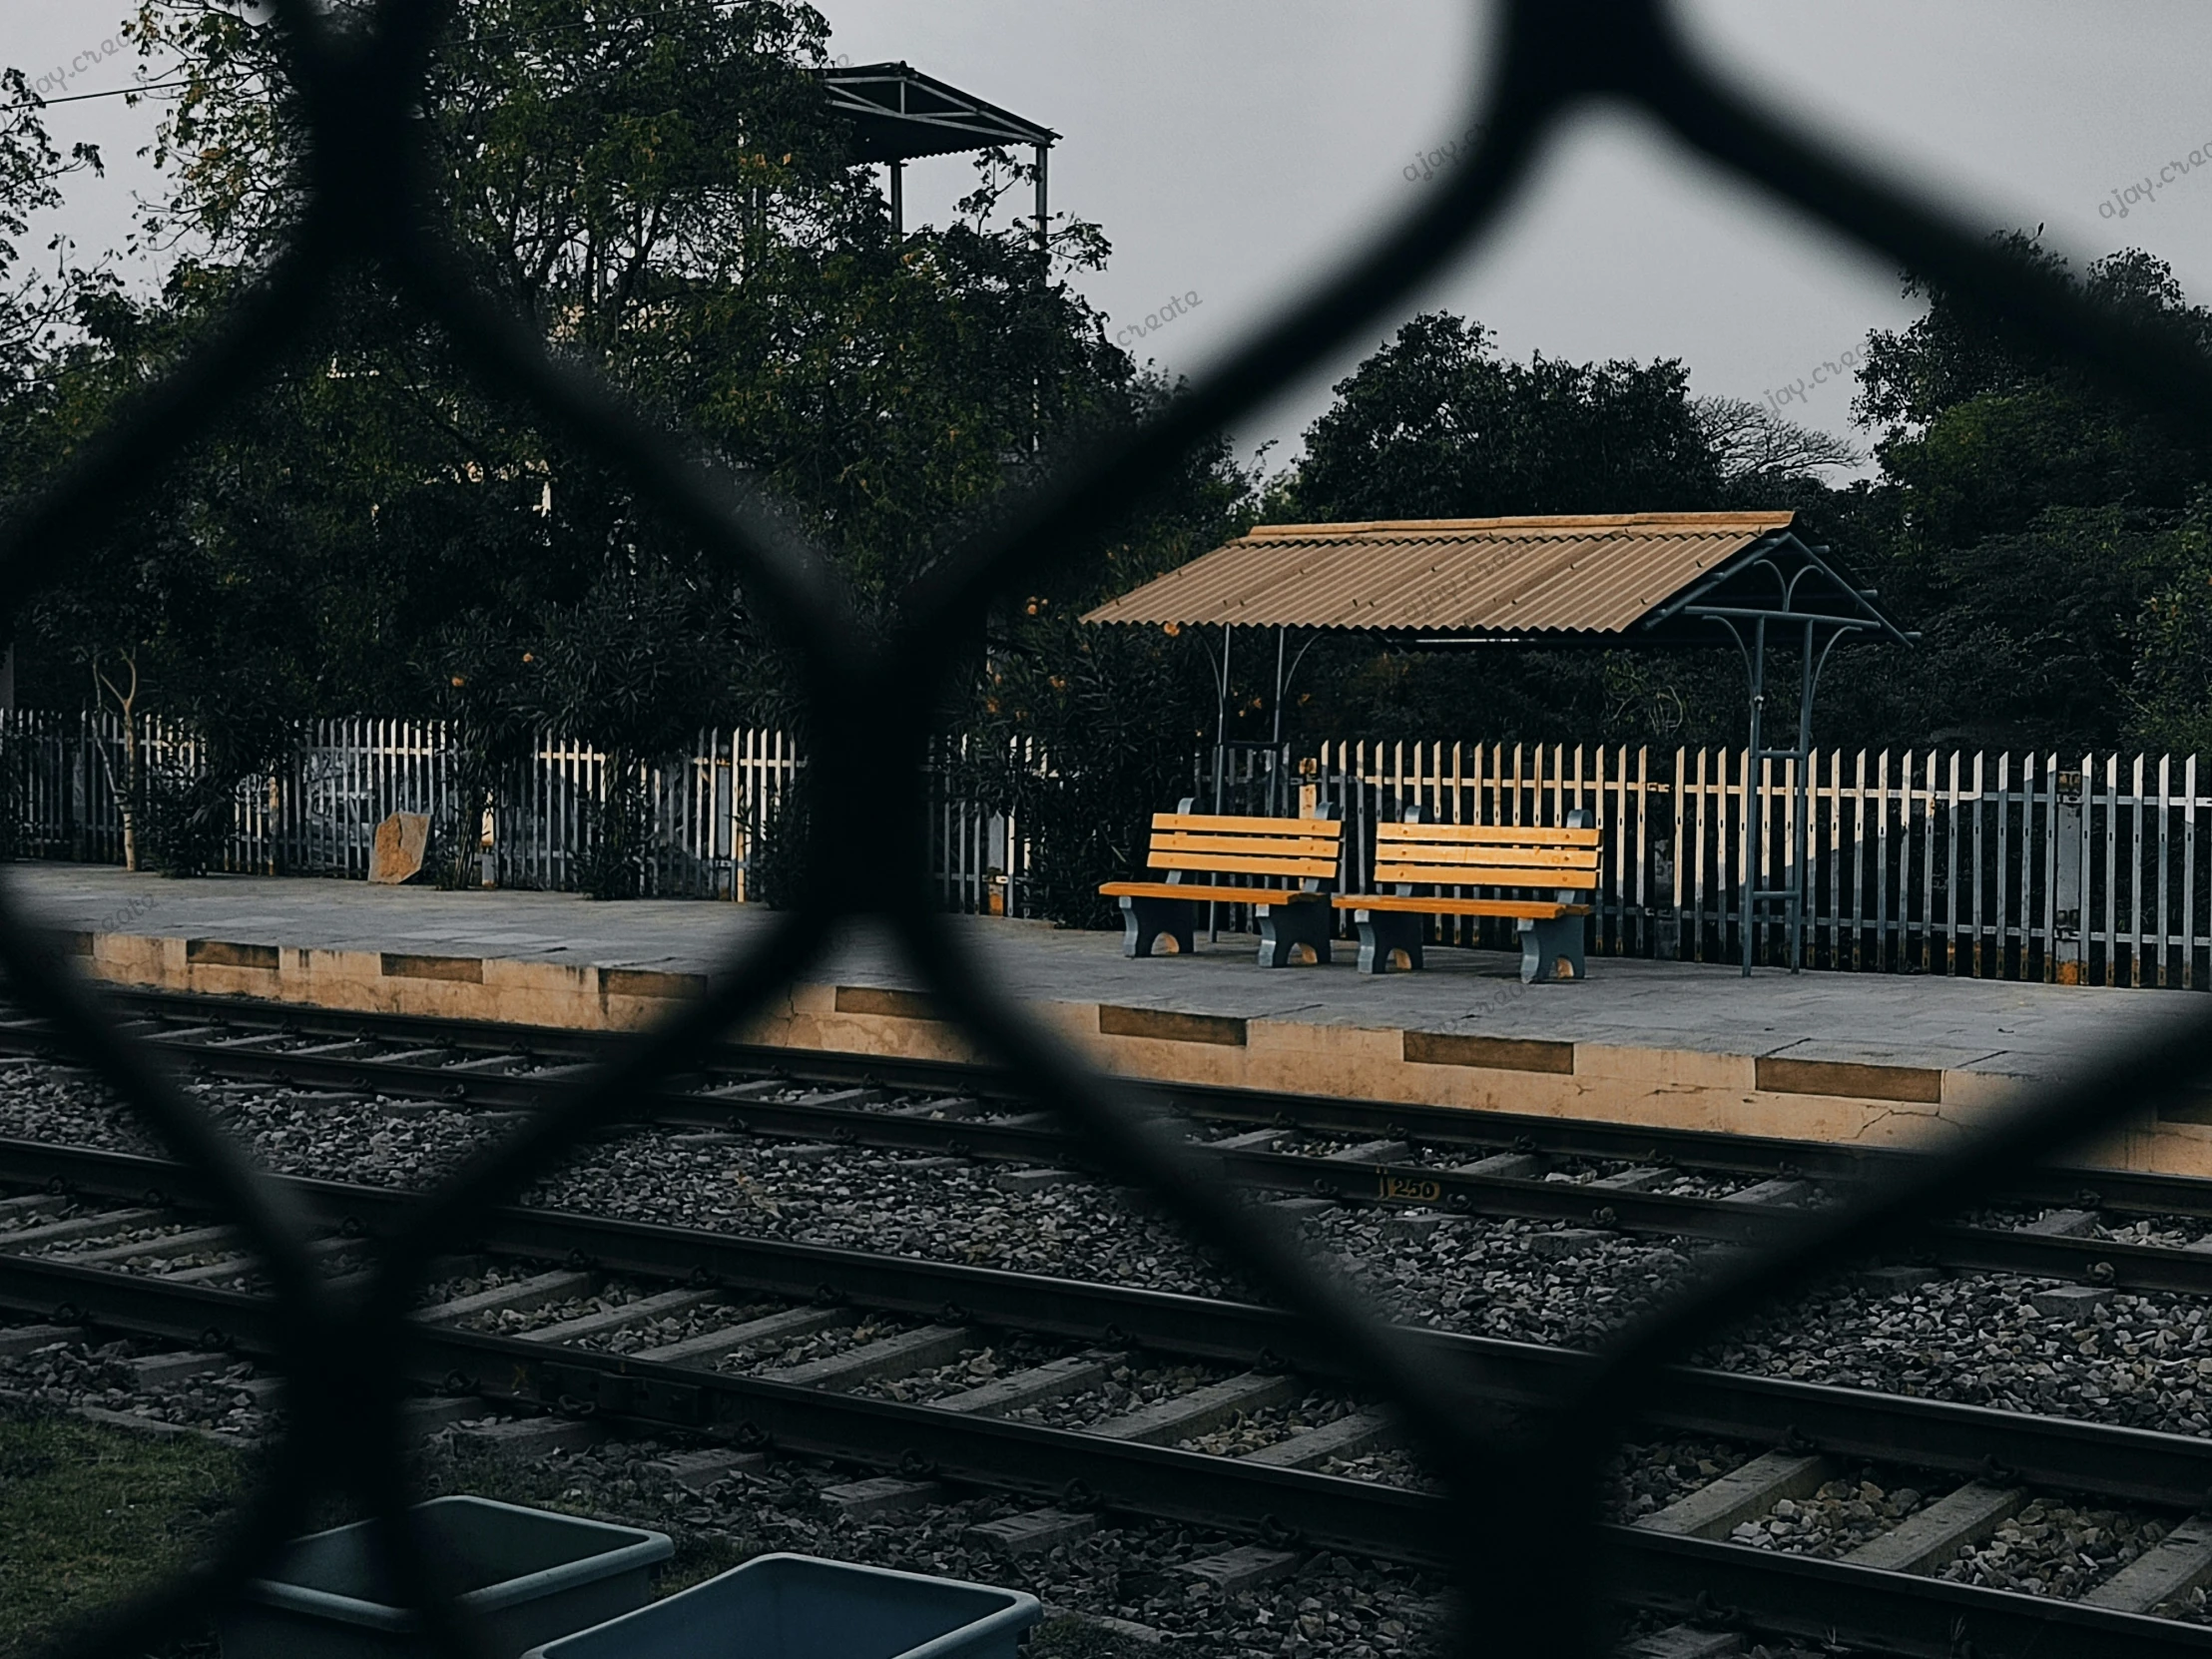 the yellow bench is in the middle of the train tracks